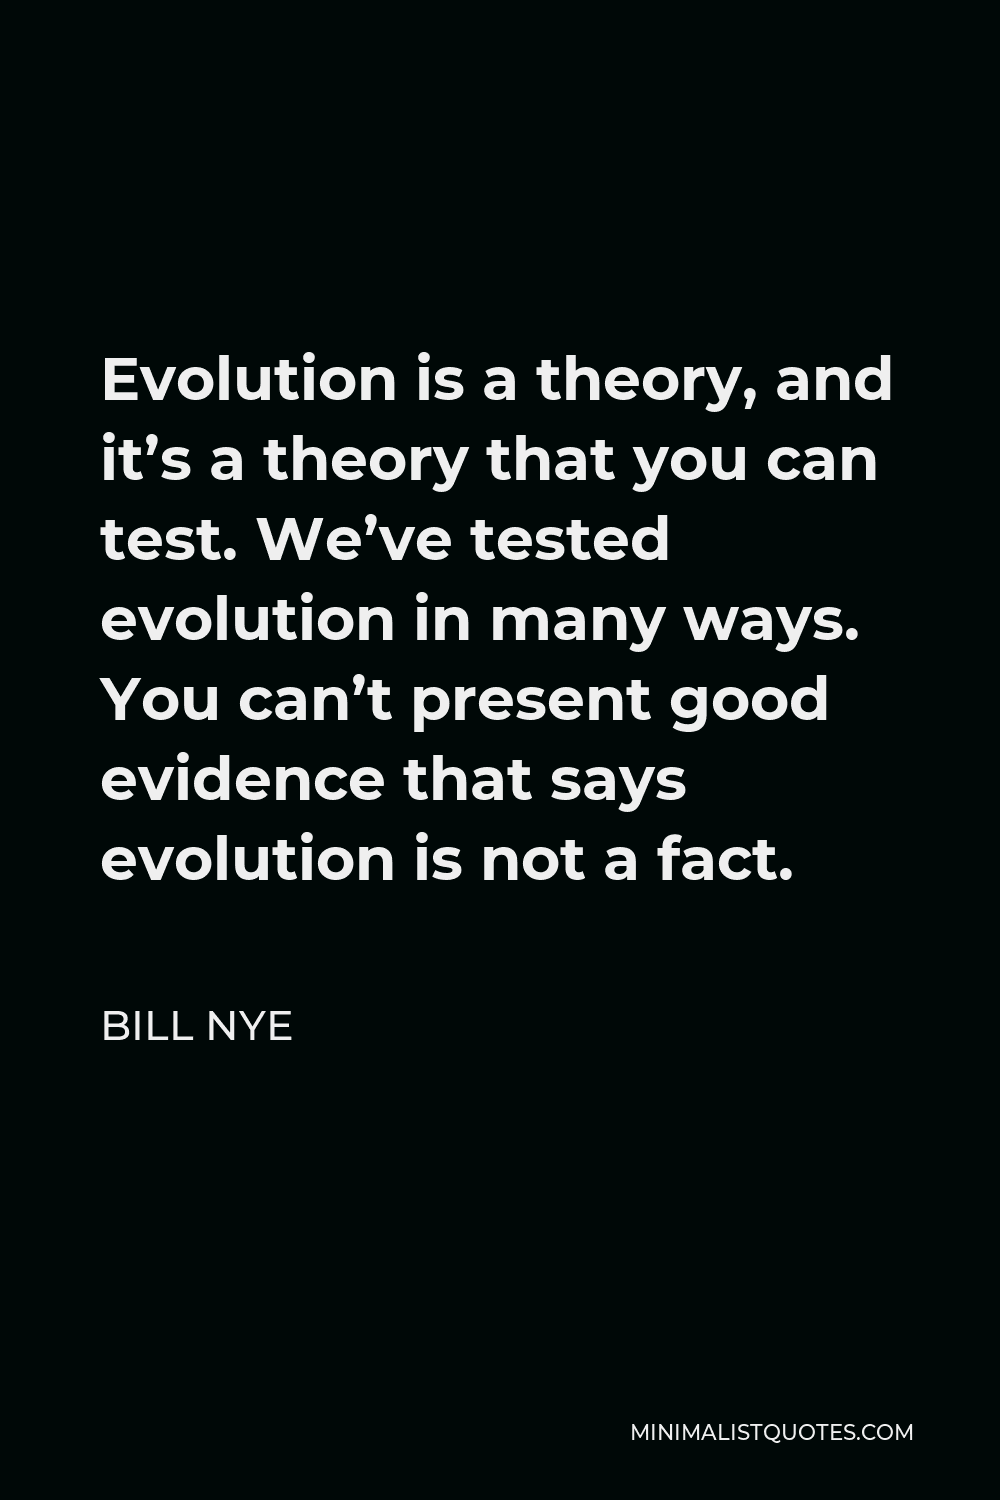 Bill Nye Quote - Evolution is a theory, and it’s a theory that you can test. We’ve tested evolution in many ways. You can’t present good evidence that says evolution is not a fact.